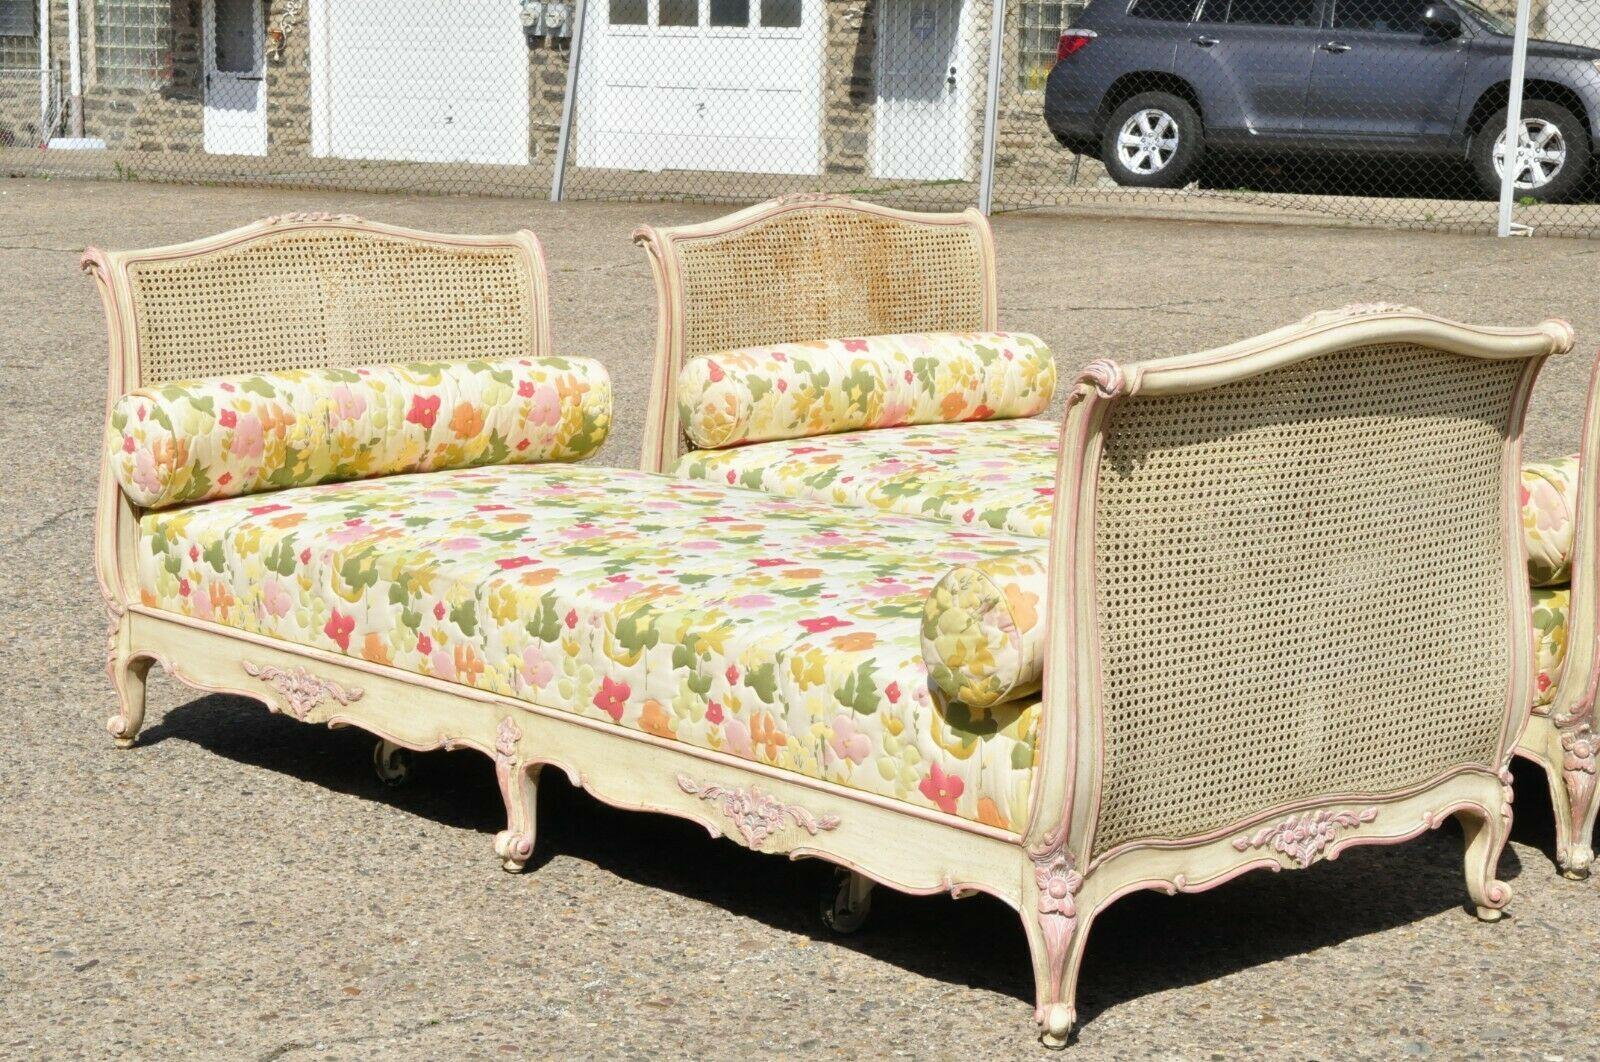 Pair of antique French Louis XV style pink and cream painted carved wood & cane daybeds. Item features double cane foot and headboards, pink and cream painted finish, solid wood frame, cabriole legs, quality craftsmanship, great style and form,